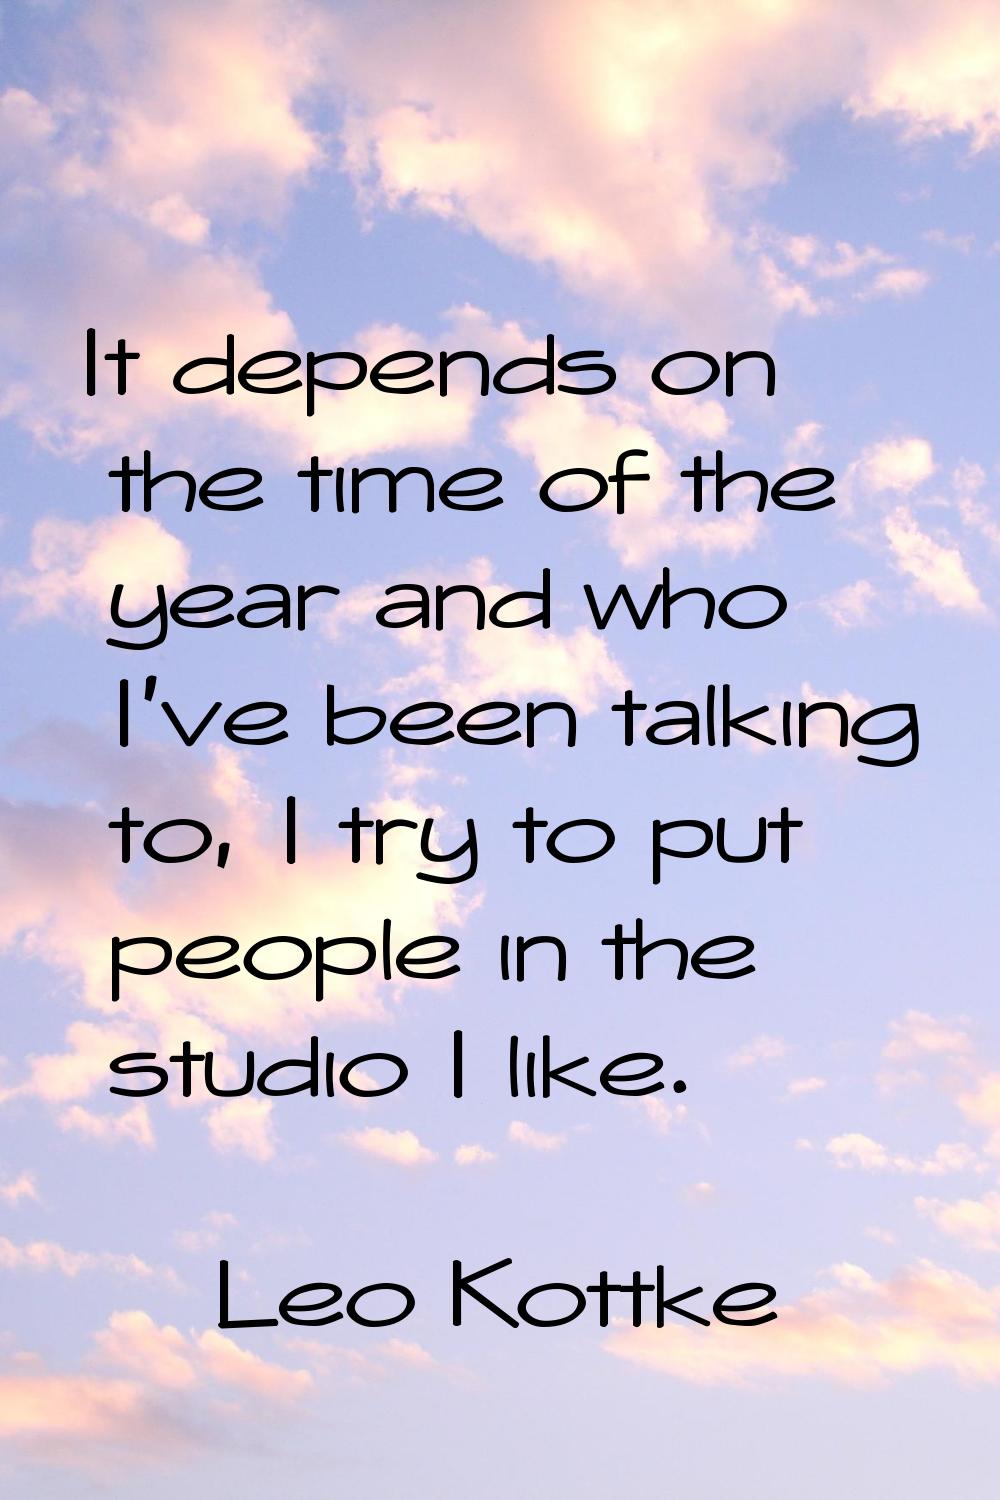 It depends on the time of the year and who I've been talking to, I try to put people in the studio 